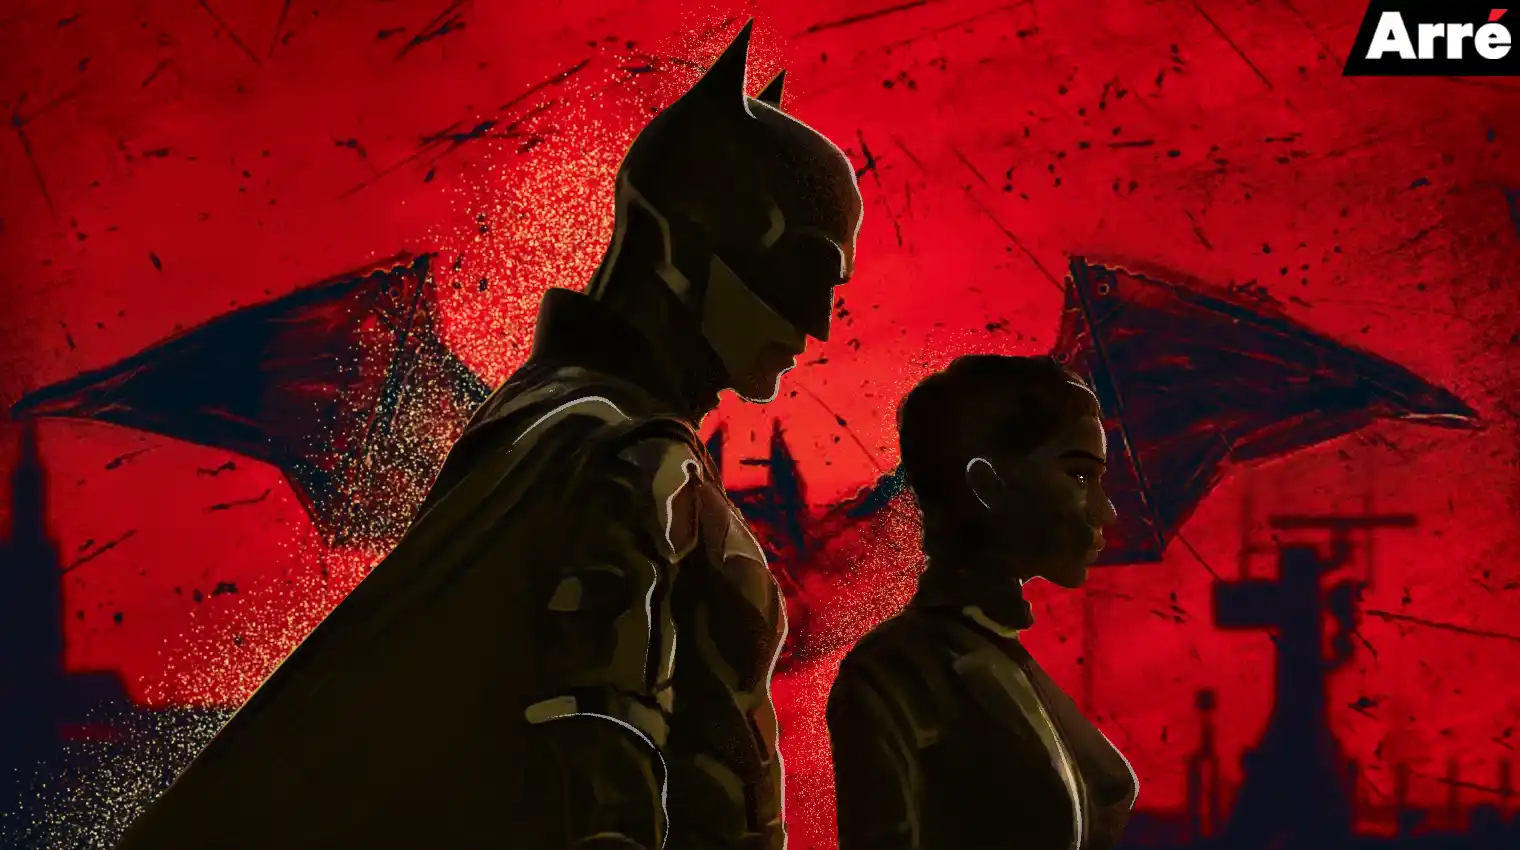 The Batman Re-imagines the Caped Crusader to Stirring Effect – Arré